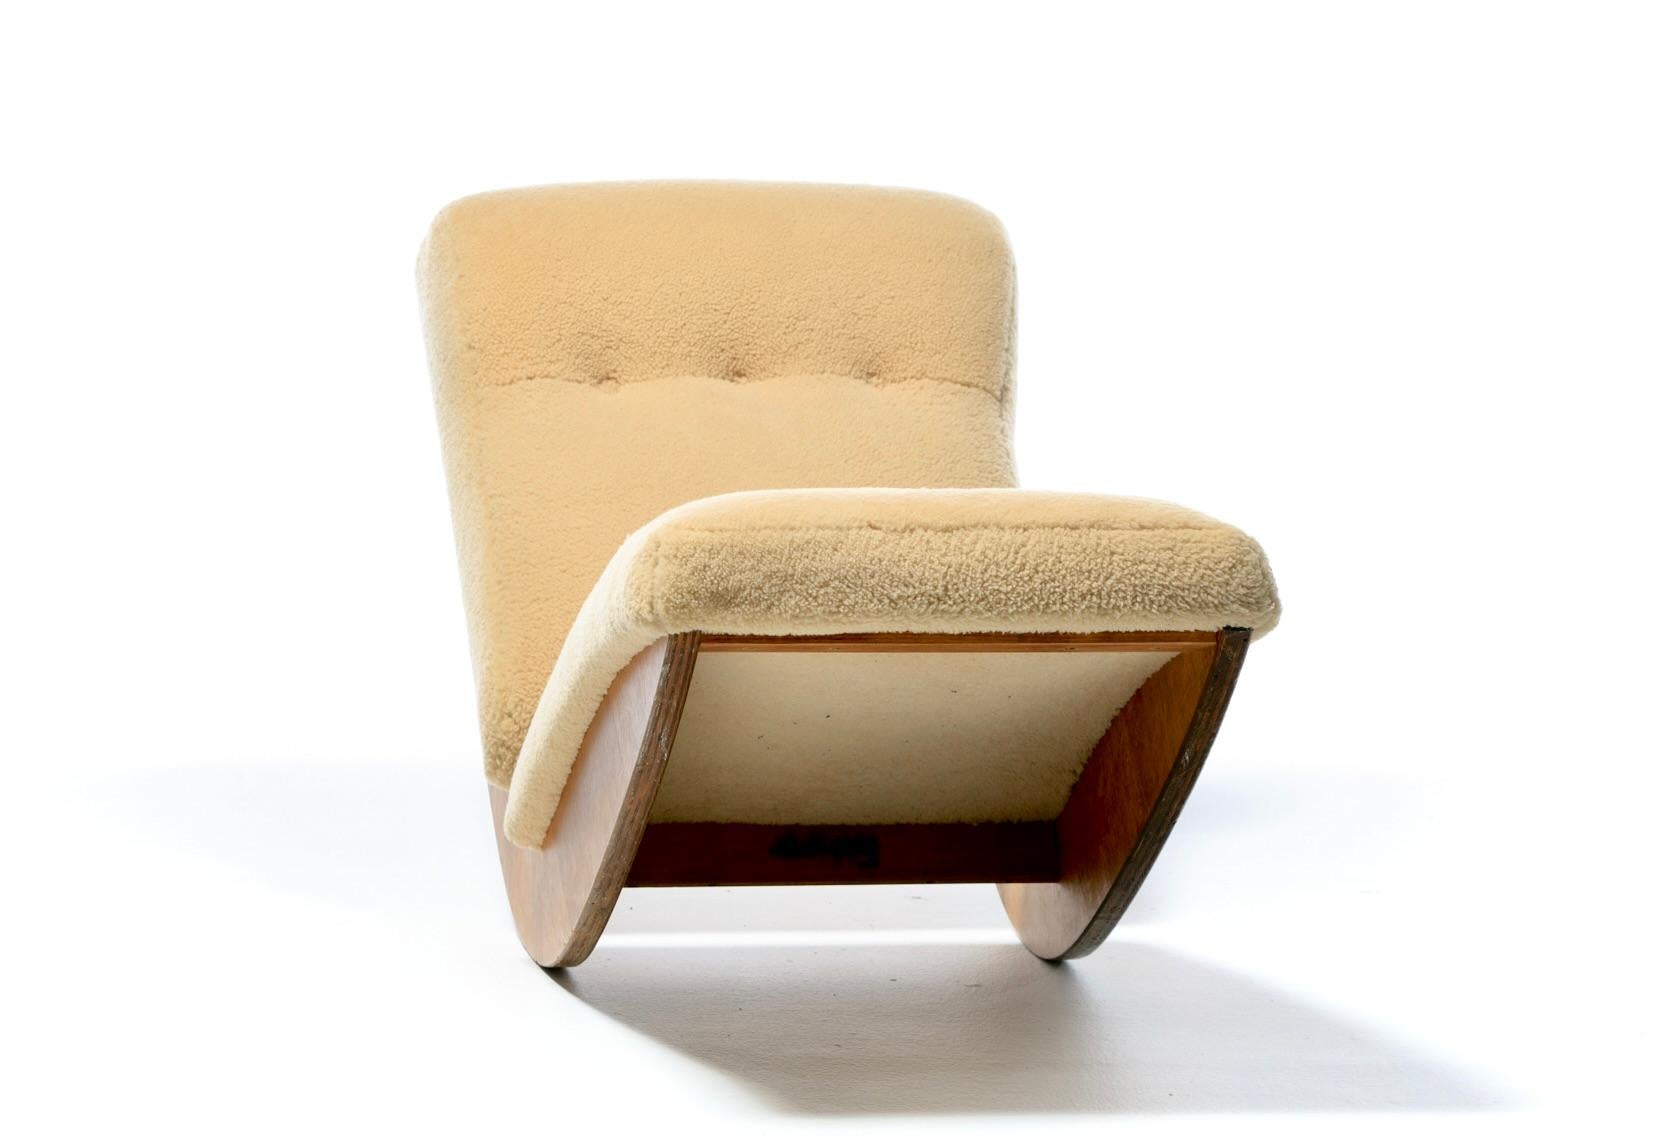 Sculptural Walnut Rocking Chaise Lounge in Soft Butterscotch Shearling c. 1980 In Good Condition For Sale In Saint Louis, MO